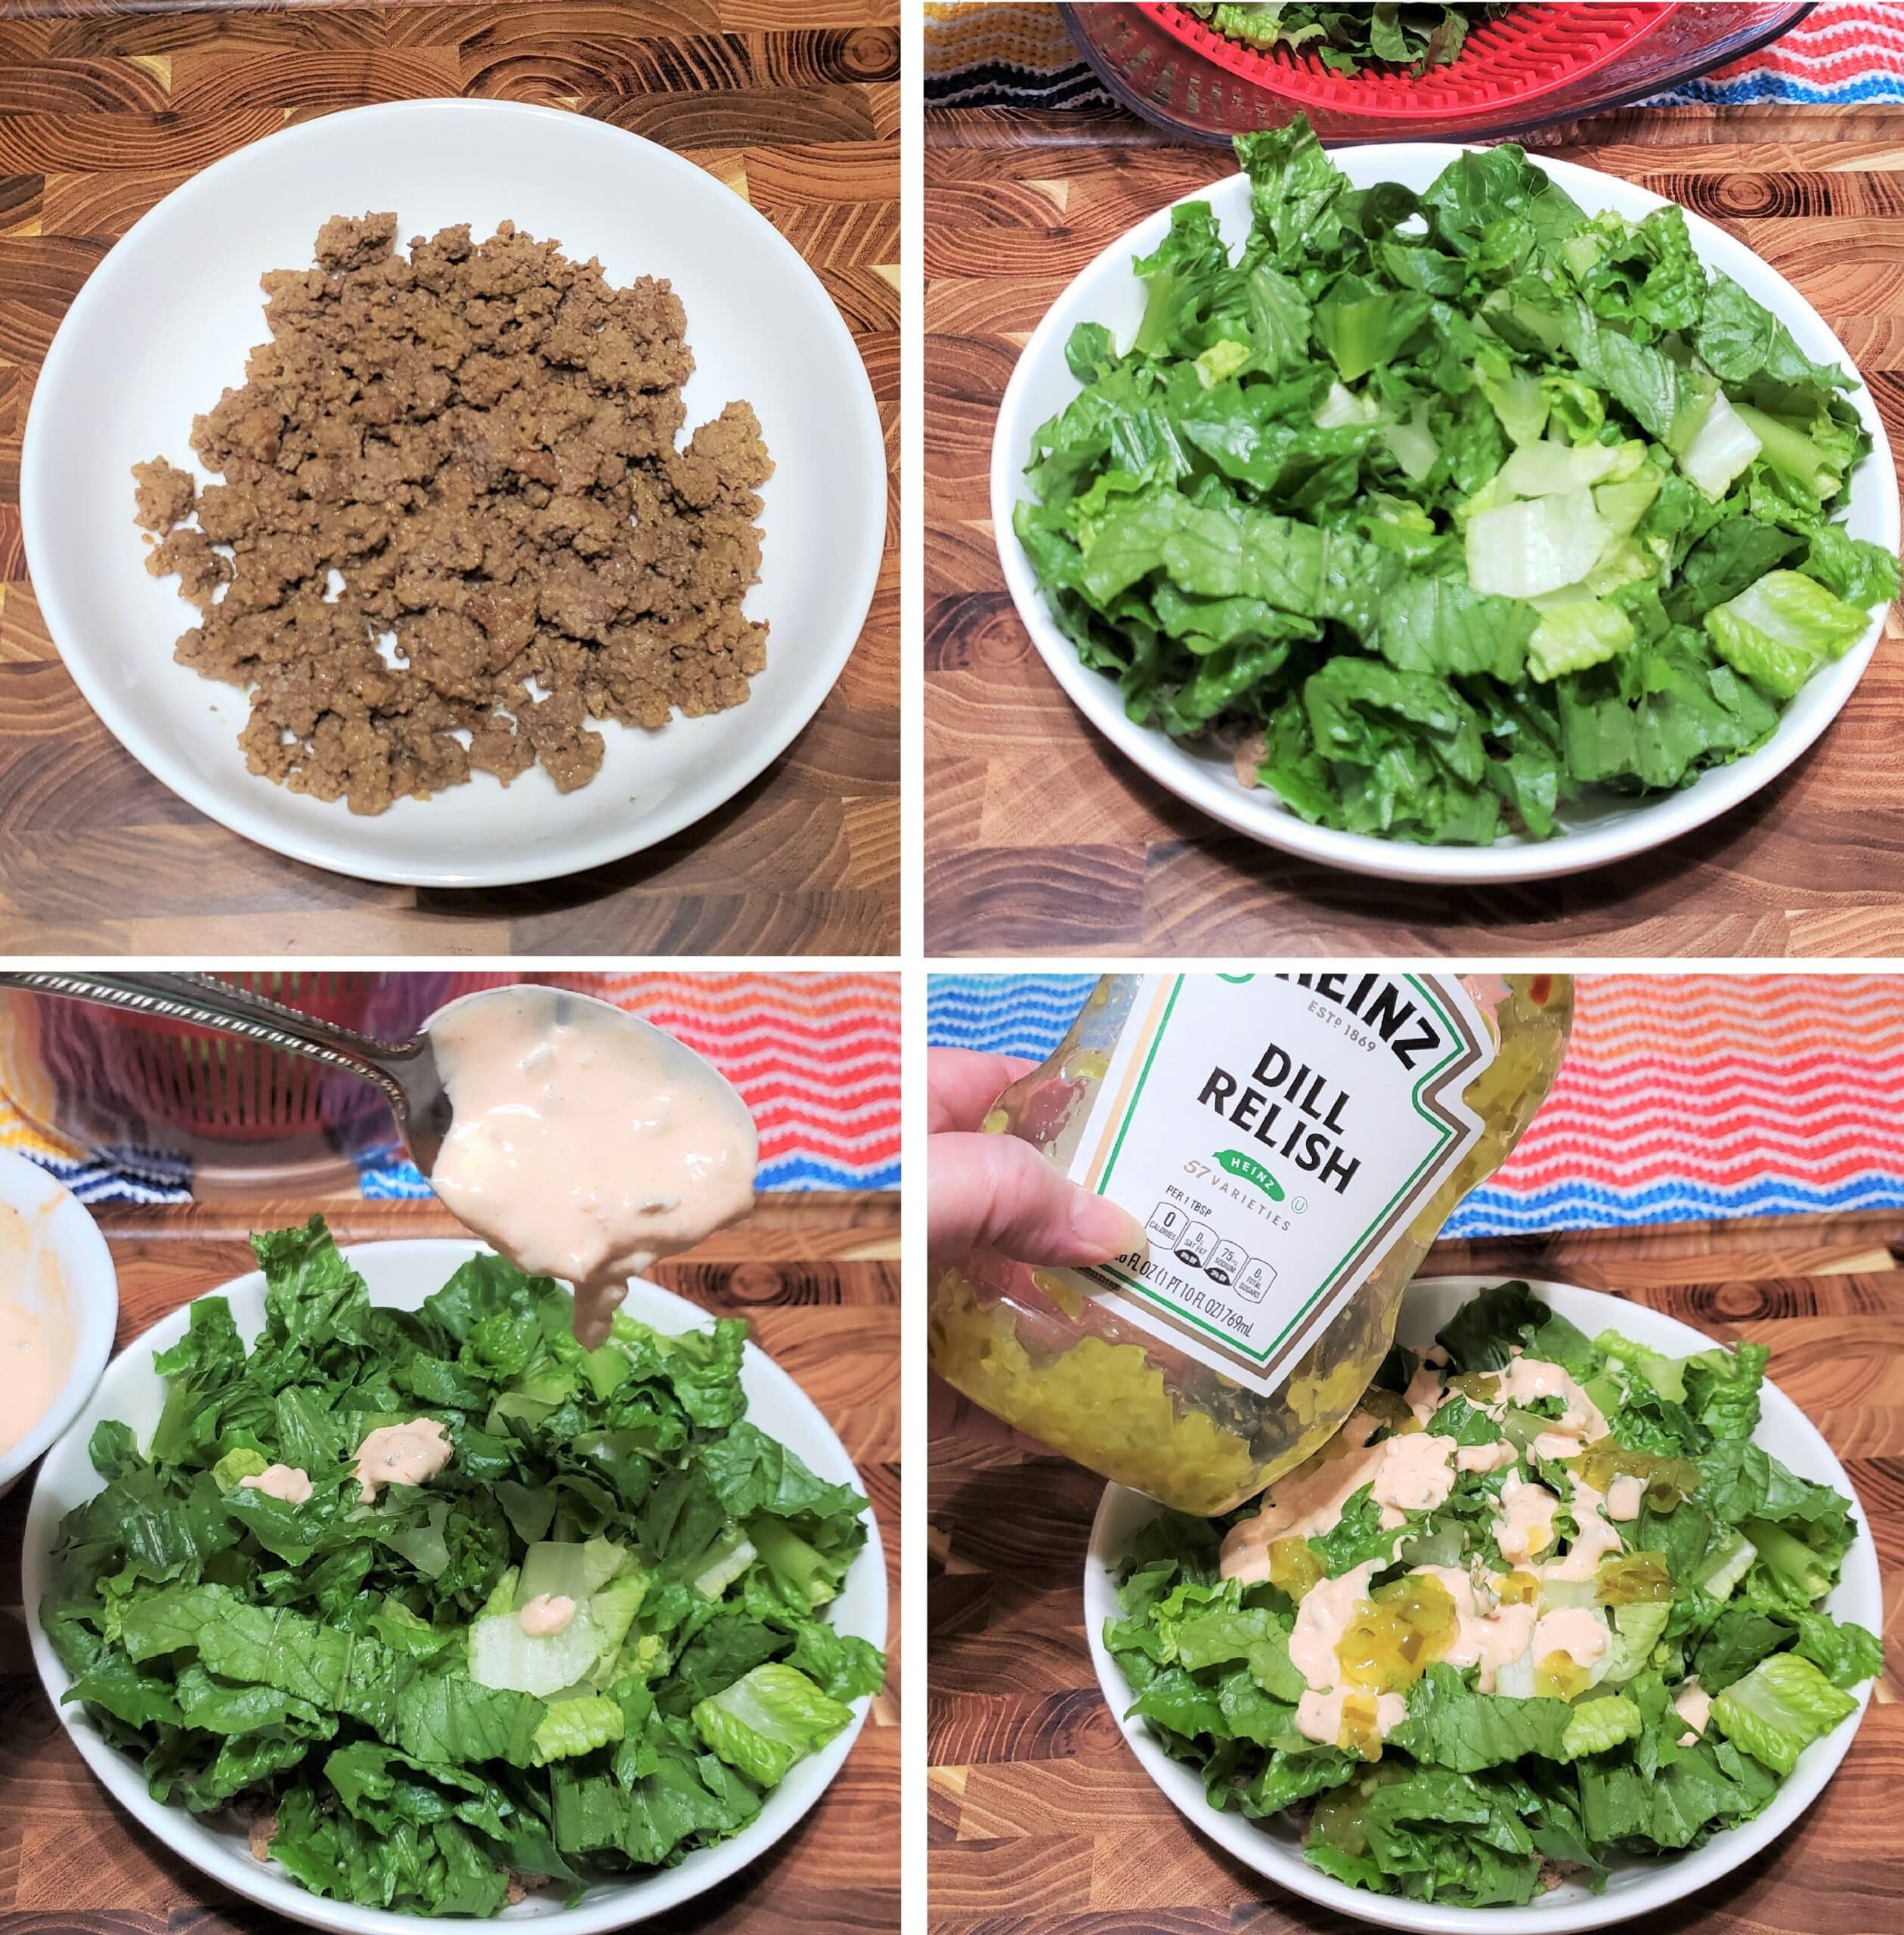 Layering on lettuce, dressing, relish and cheese